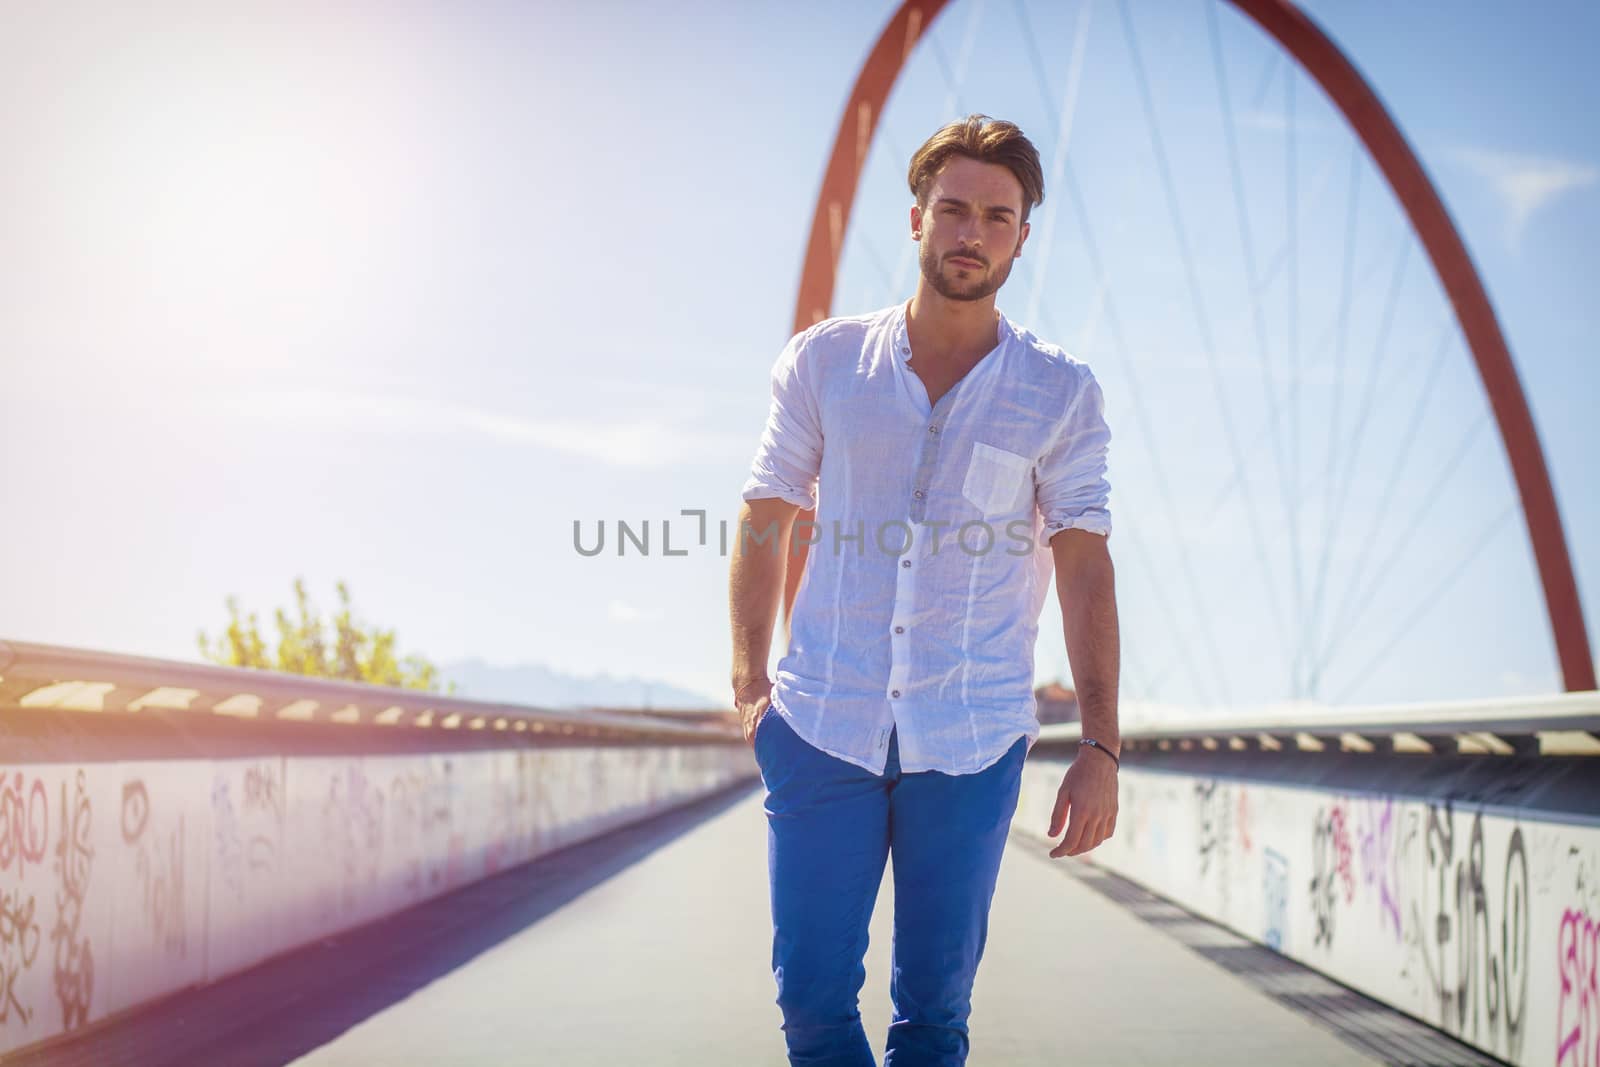 One handsome young man in urban setting in European city, standing